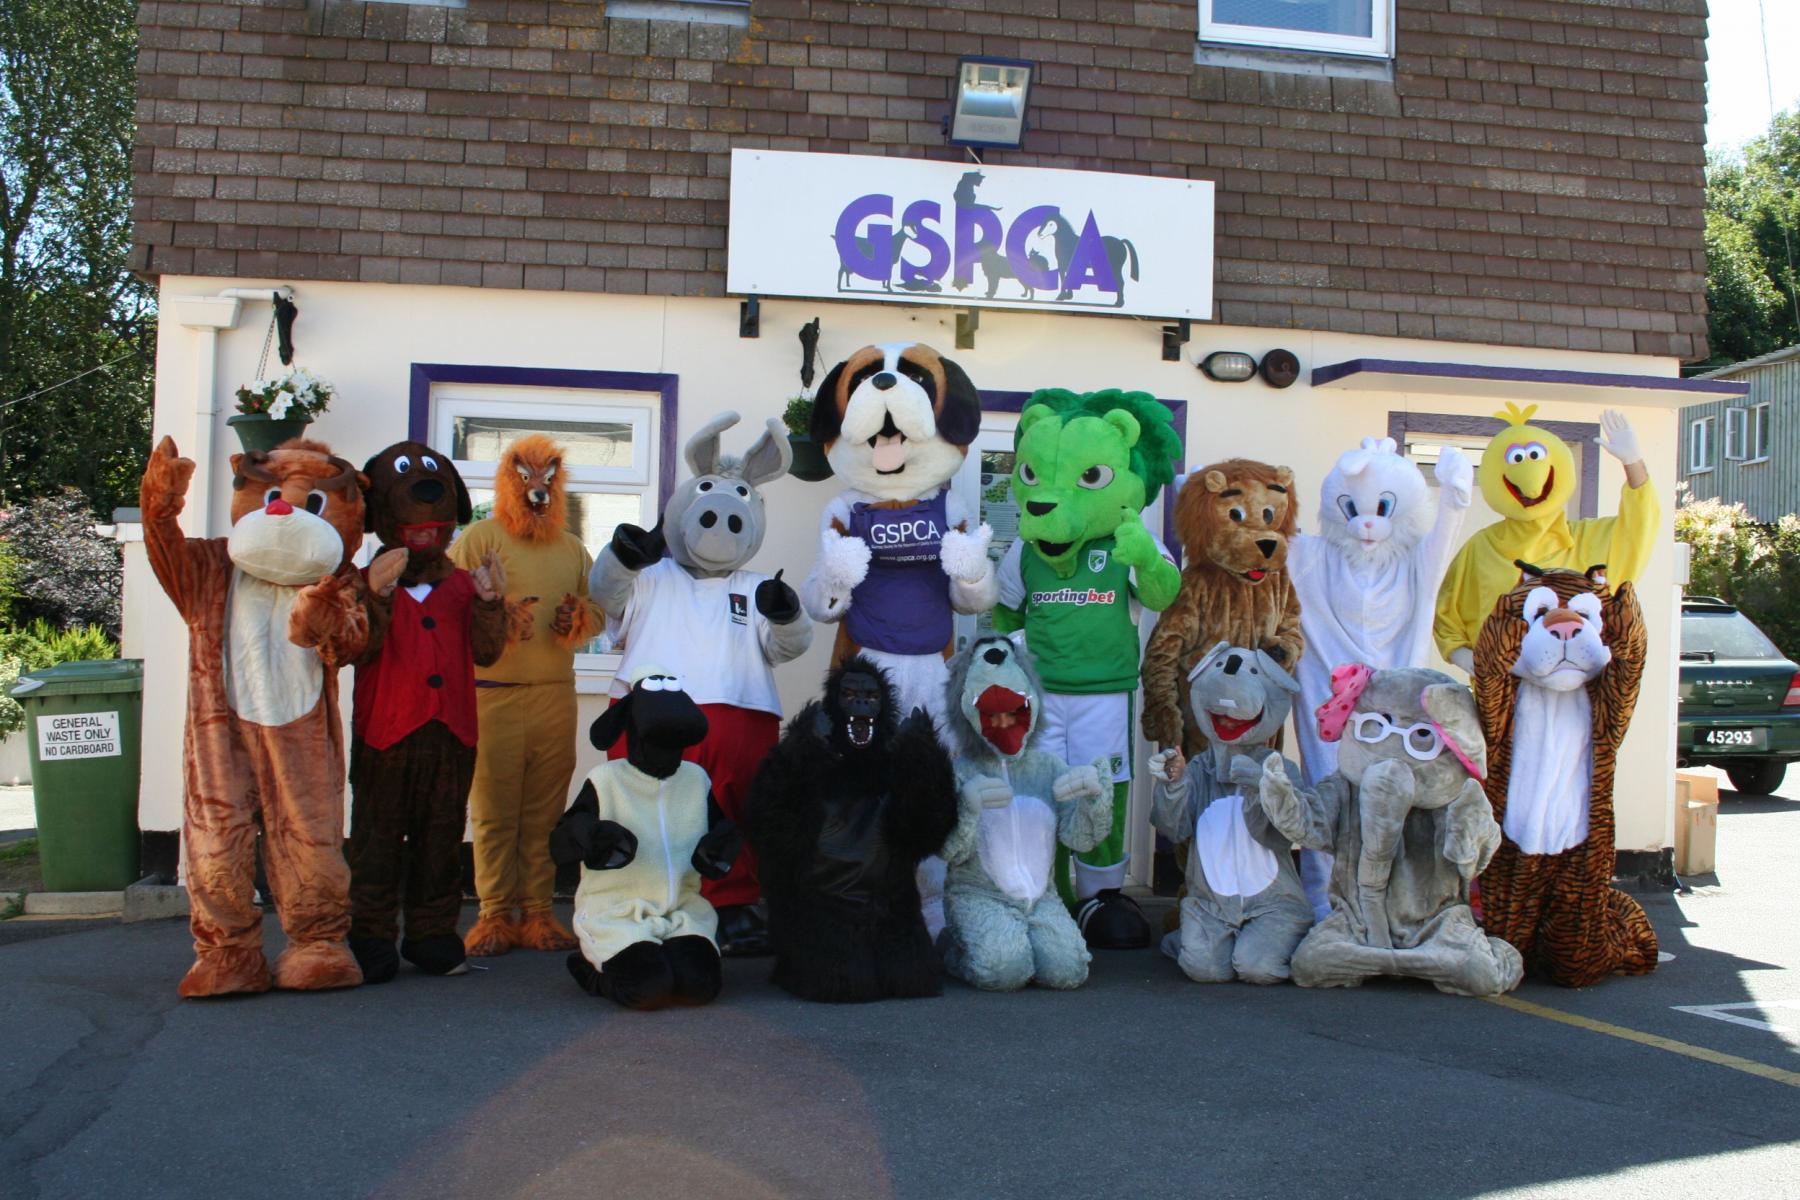 Mascot Racing in Guernsey with Roary the GFC Lion, Daniel the Donkey from Island FM, Bernard the GSPCA Mascot and animal friends